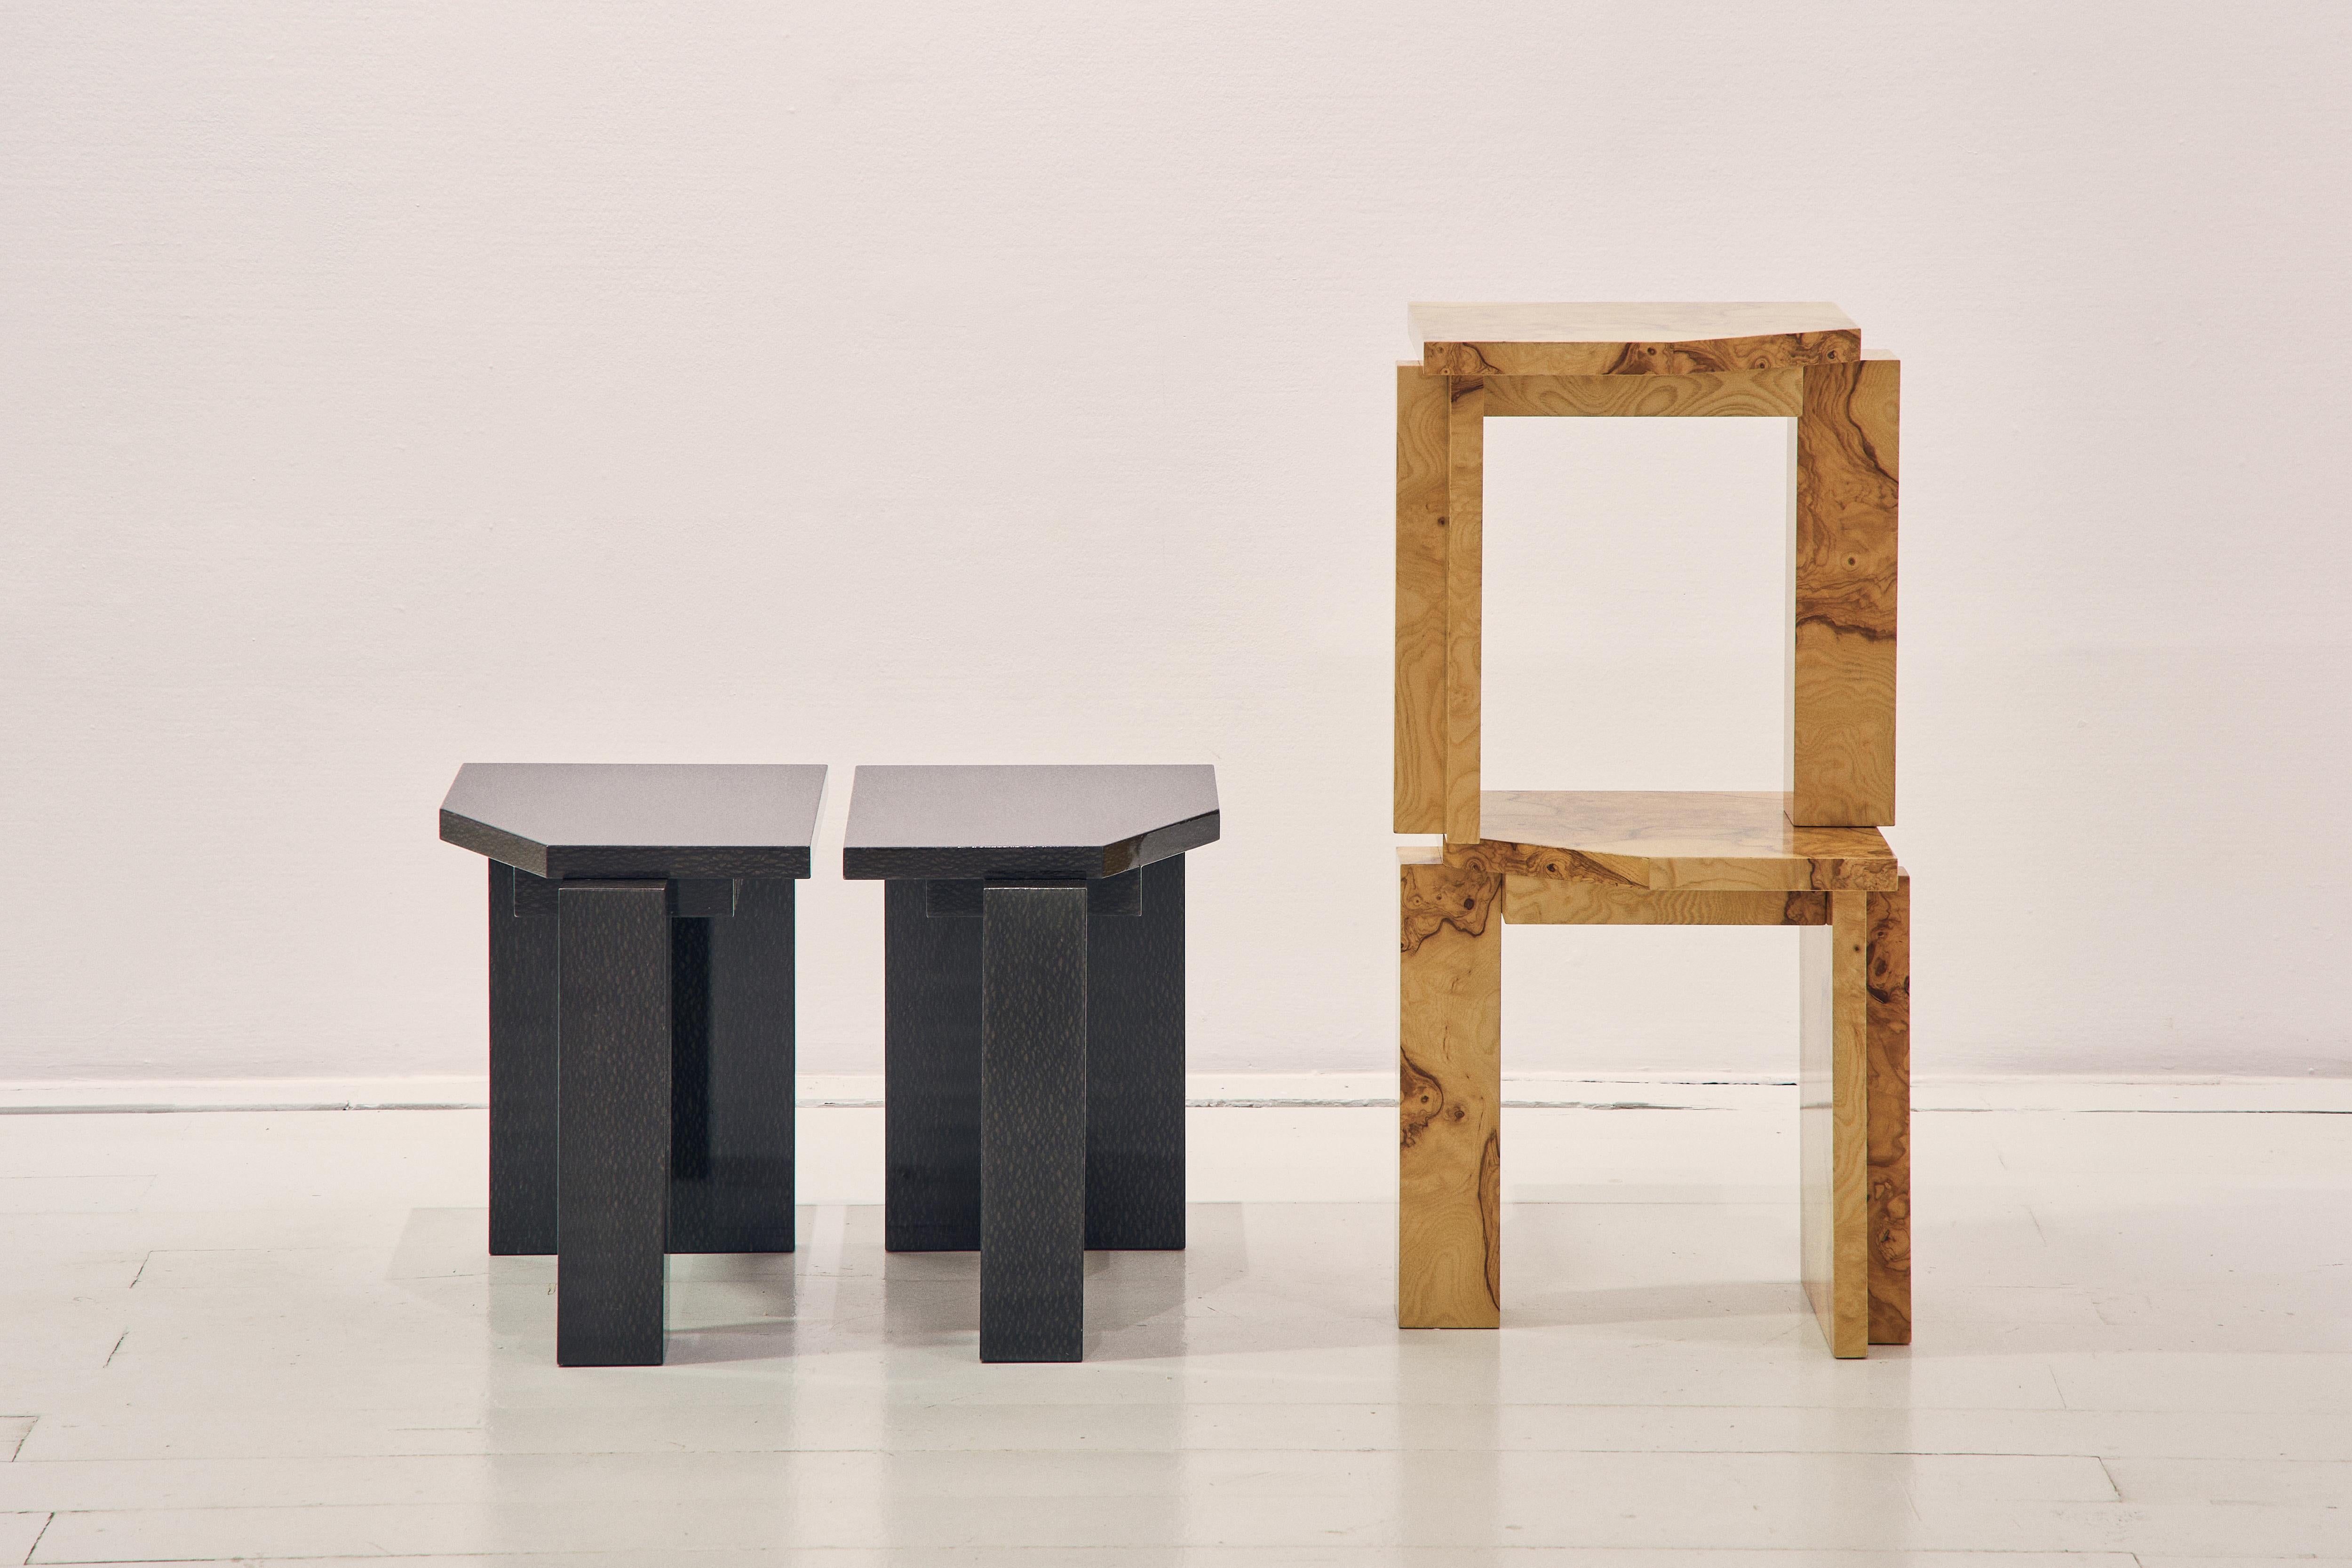 The source of inspiration for the form of the objects is the furniture that construction workers in Russia make for everyday use by means turned out to be at hand on the site.
The stool is made of MDF and after totally covered with a ash root